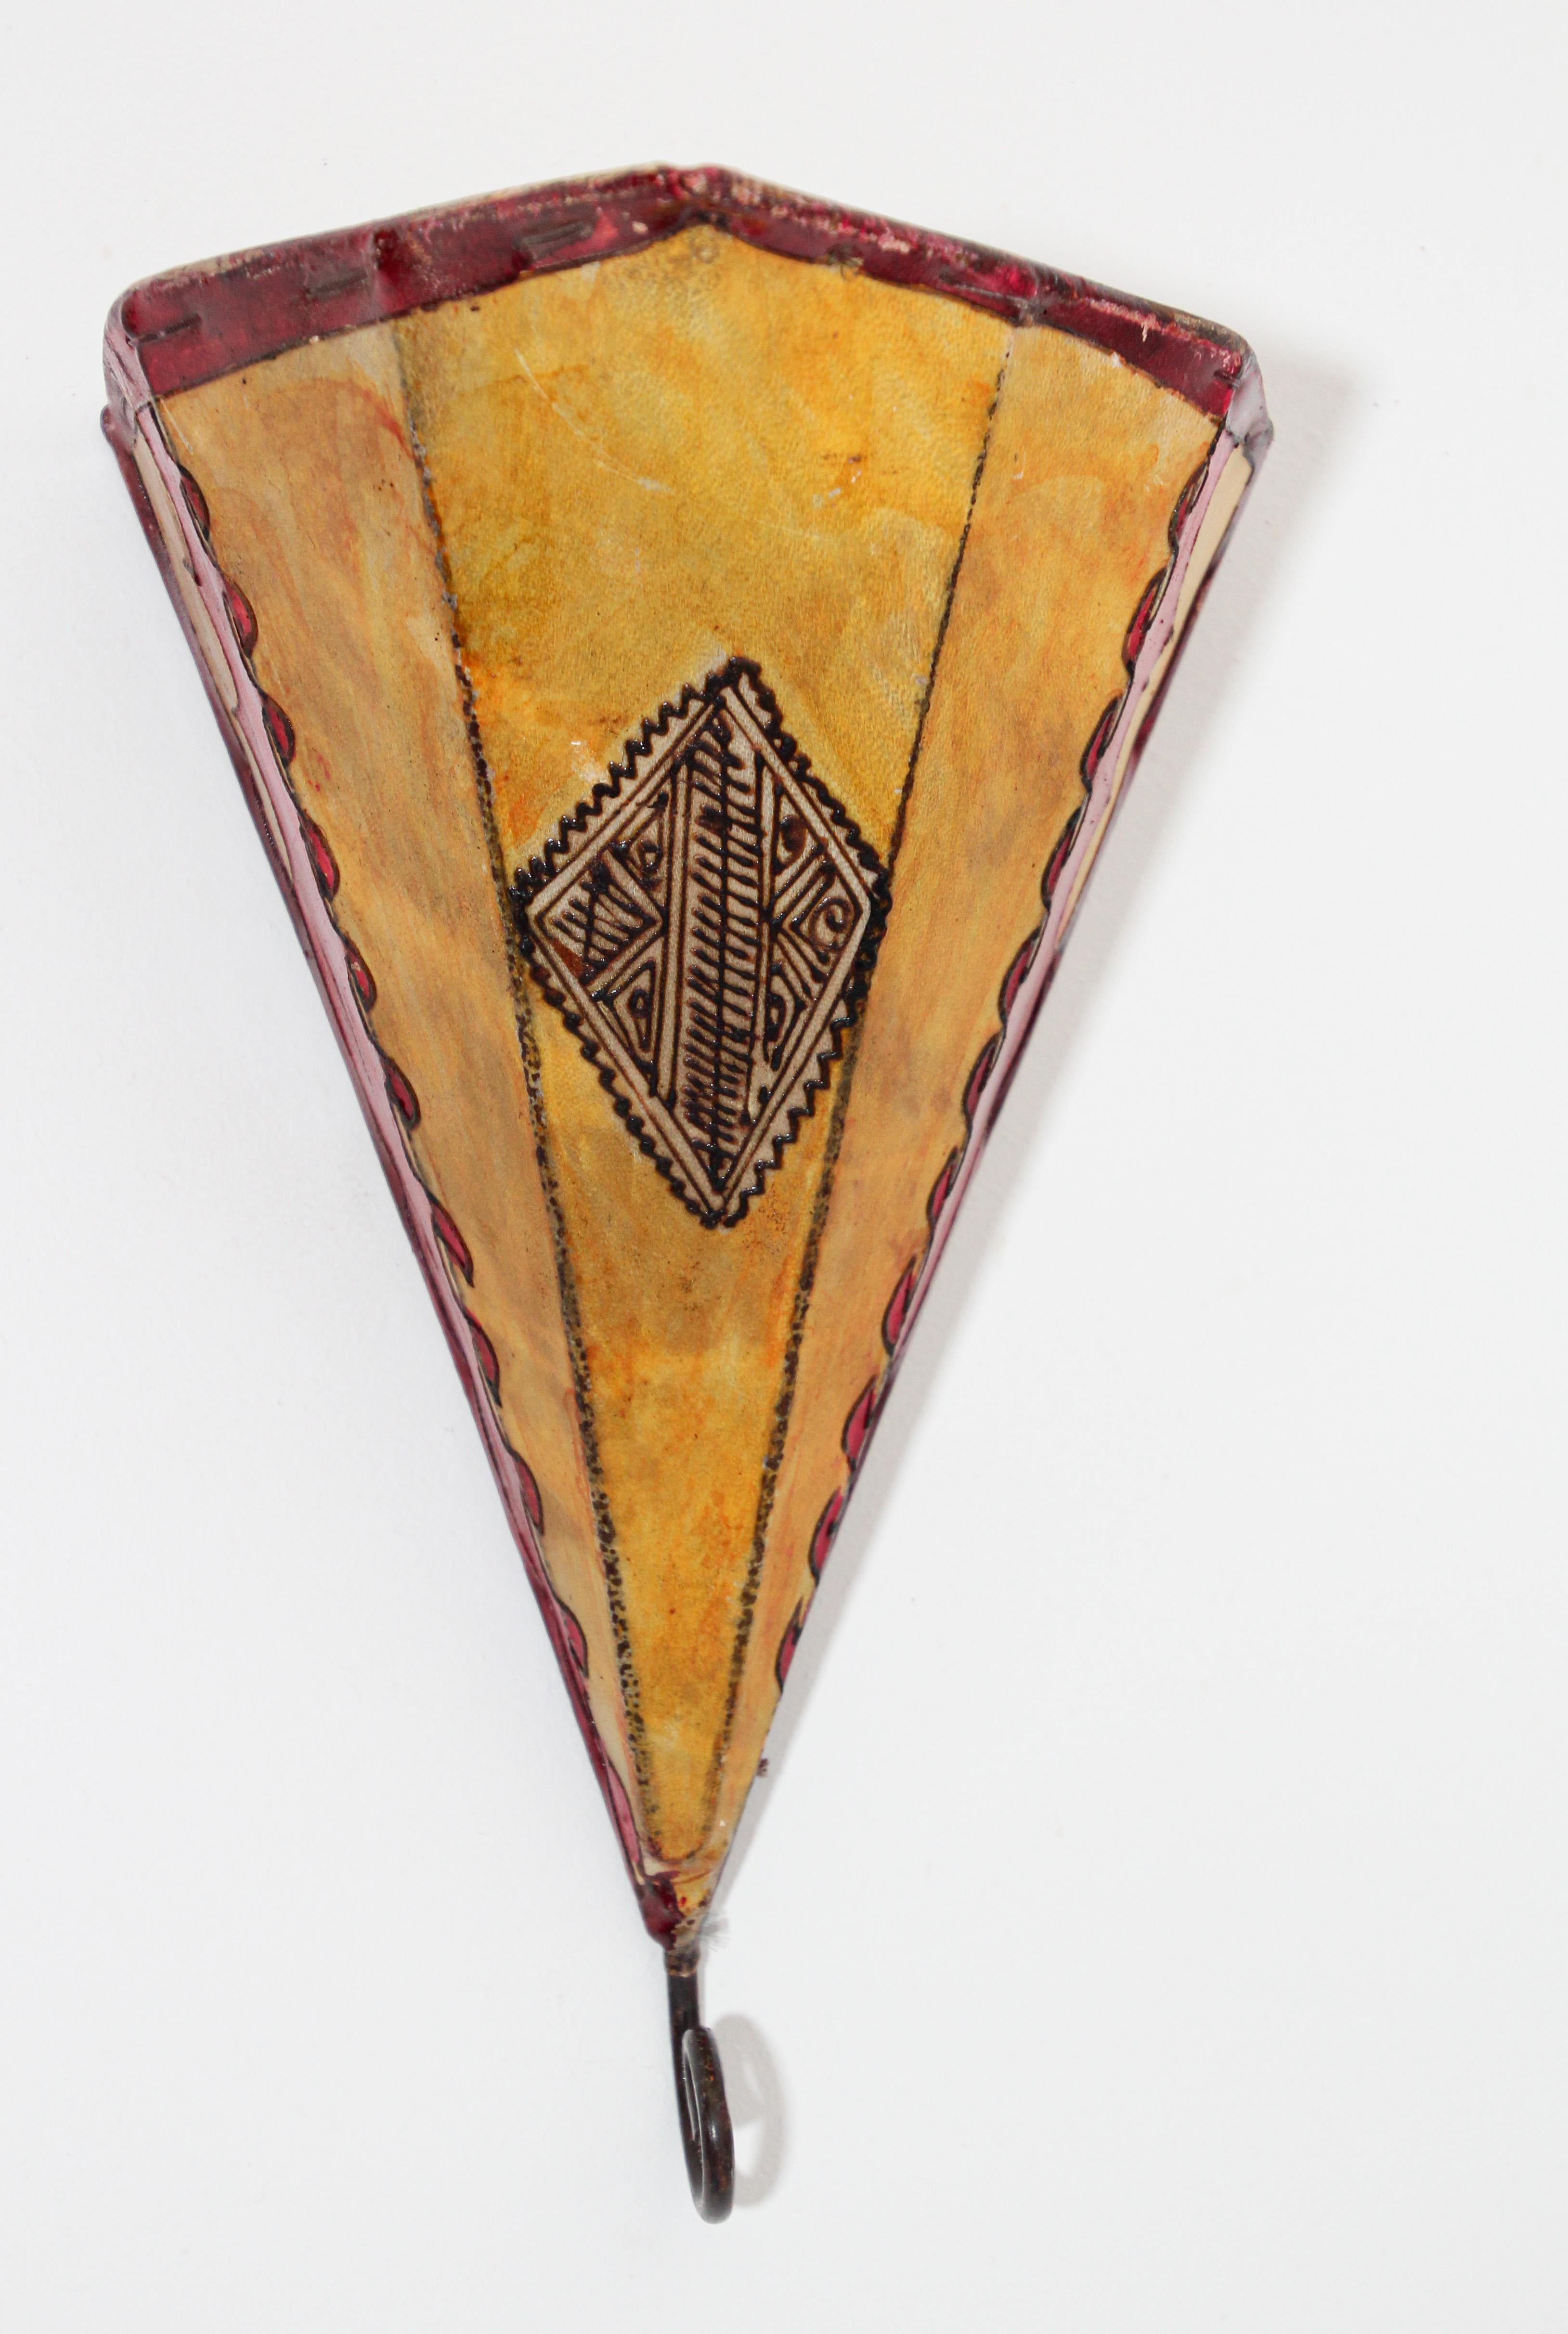 African Tribal Art parchment wall shade sconce featuring a large triangle hide form stitched on iron and hand painted surface.
These Art pieces could be used as wall lamp shade.
Iron frame covered with hide parchment which has been hand painted with